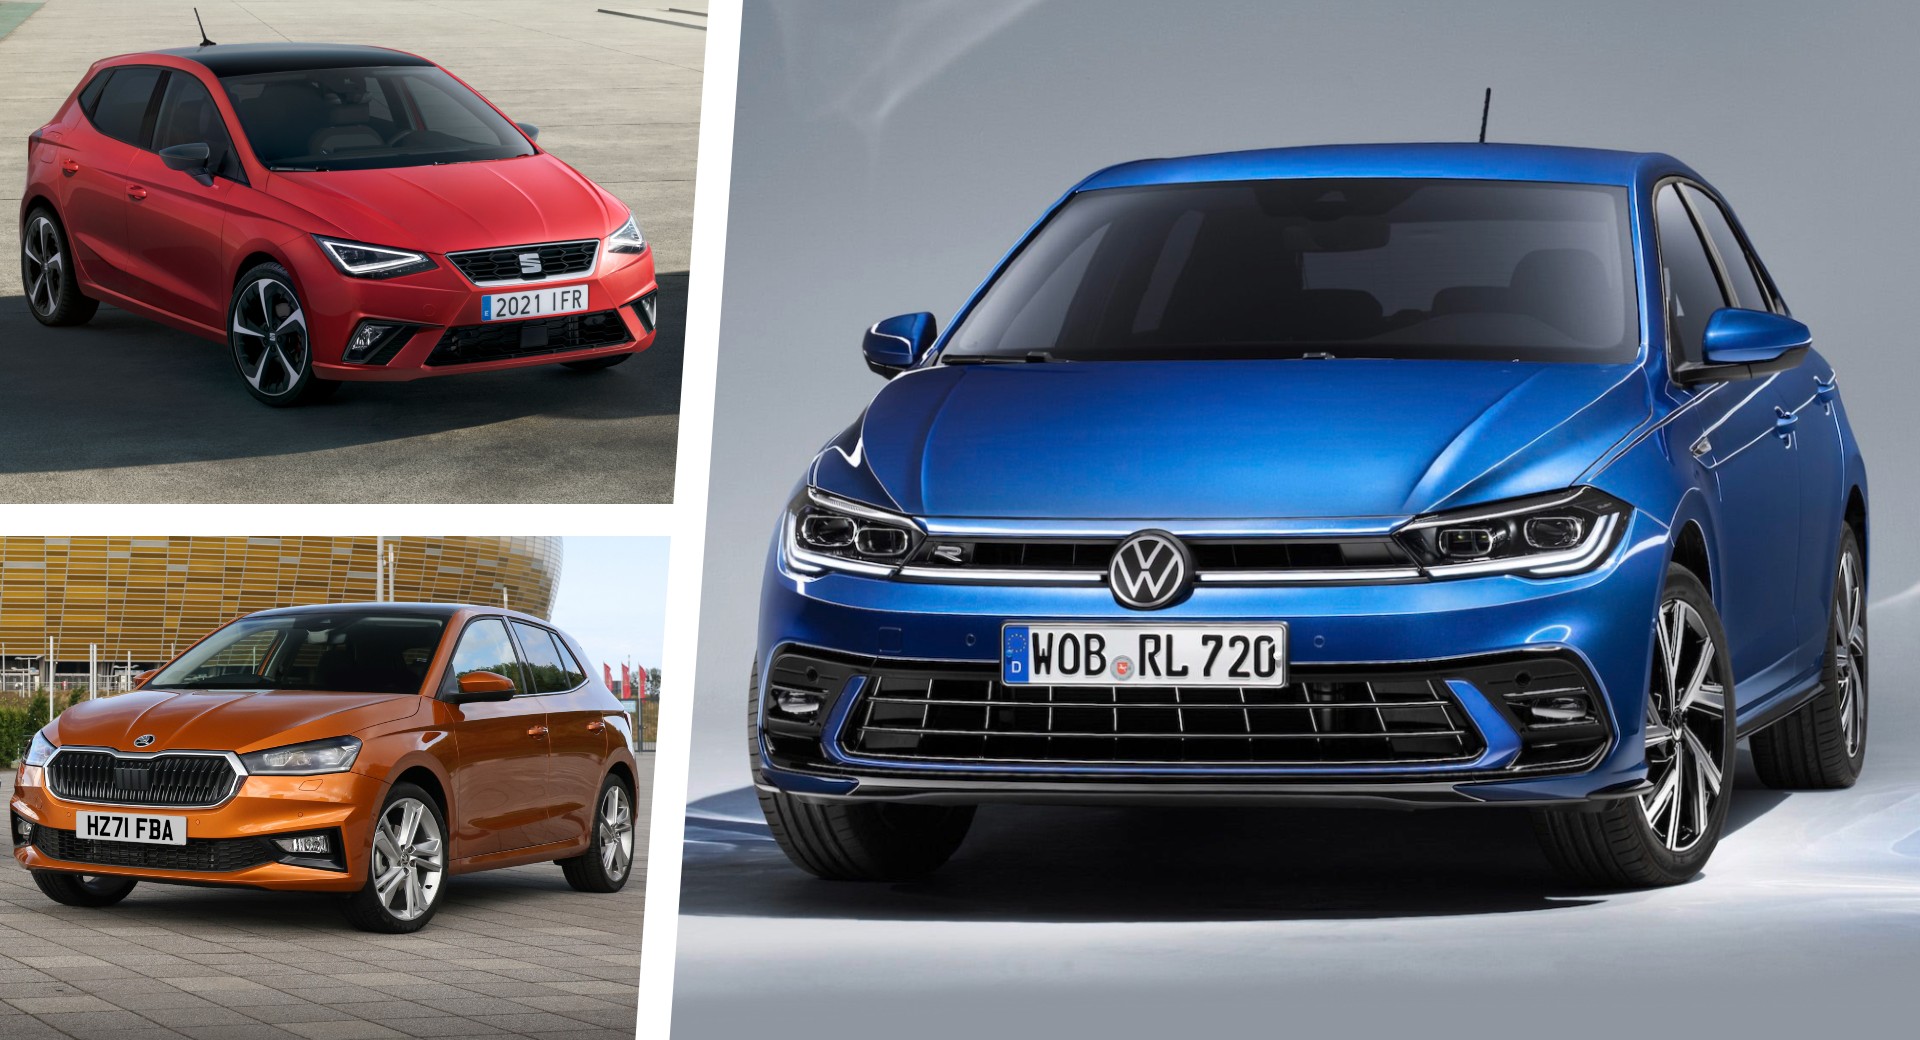 VW, Skoda, And Seat Models To Share More Parts Under Their Uniquely  Designed Bodies